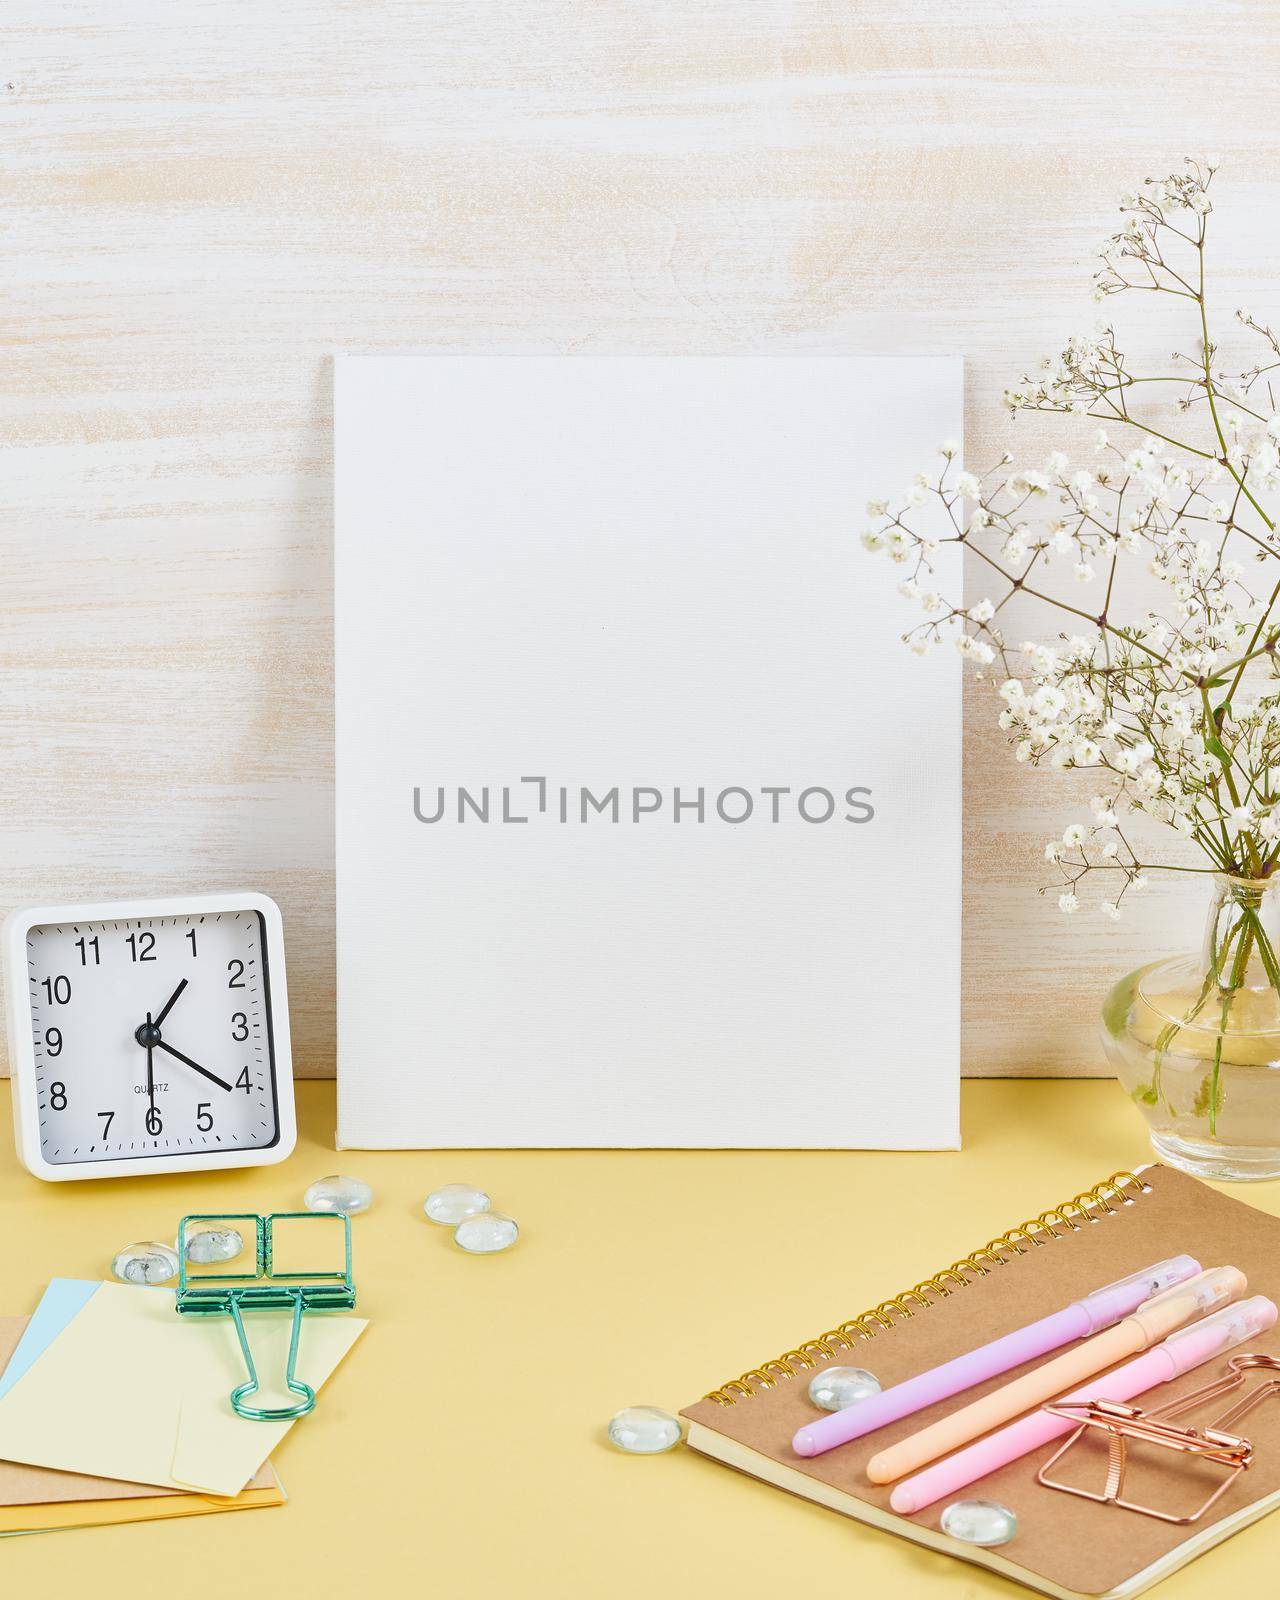 Mockup with blank white frame on yellow table against wooden wall, alarm, flower in vaze, vertical by NataBene